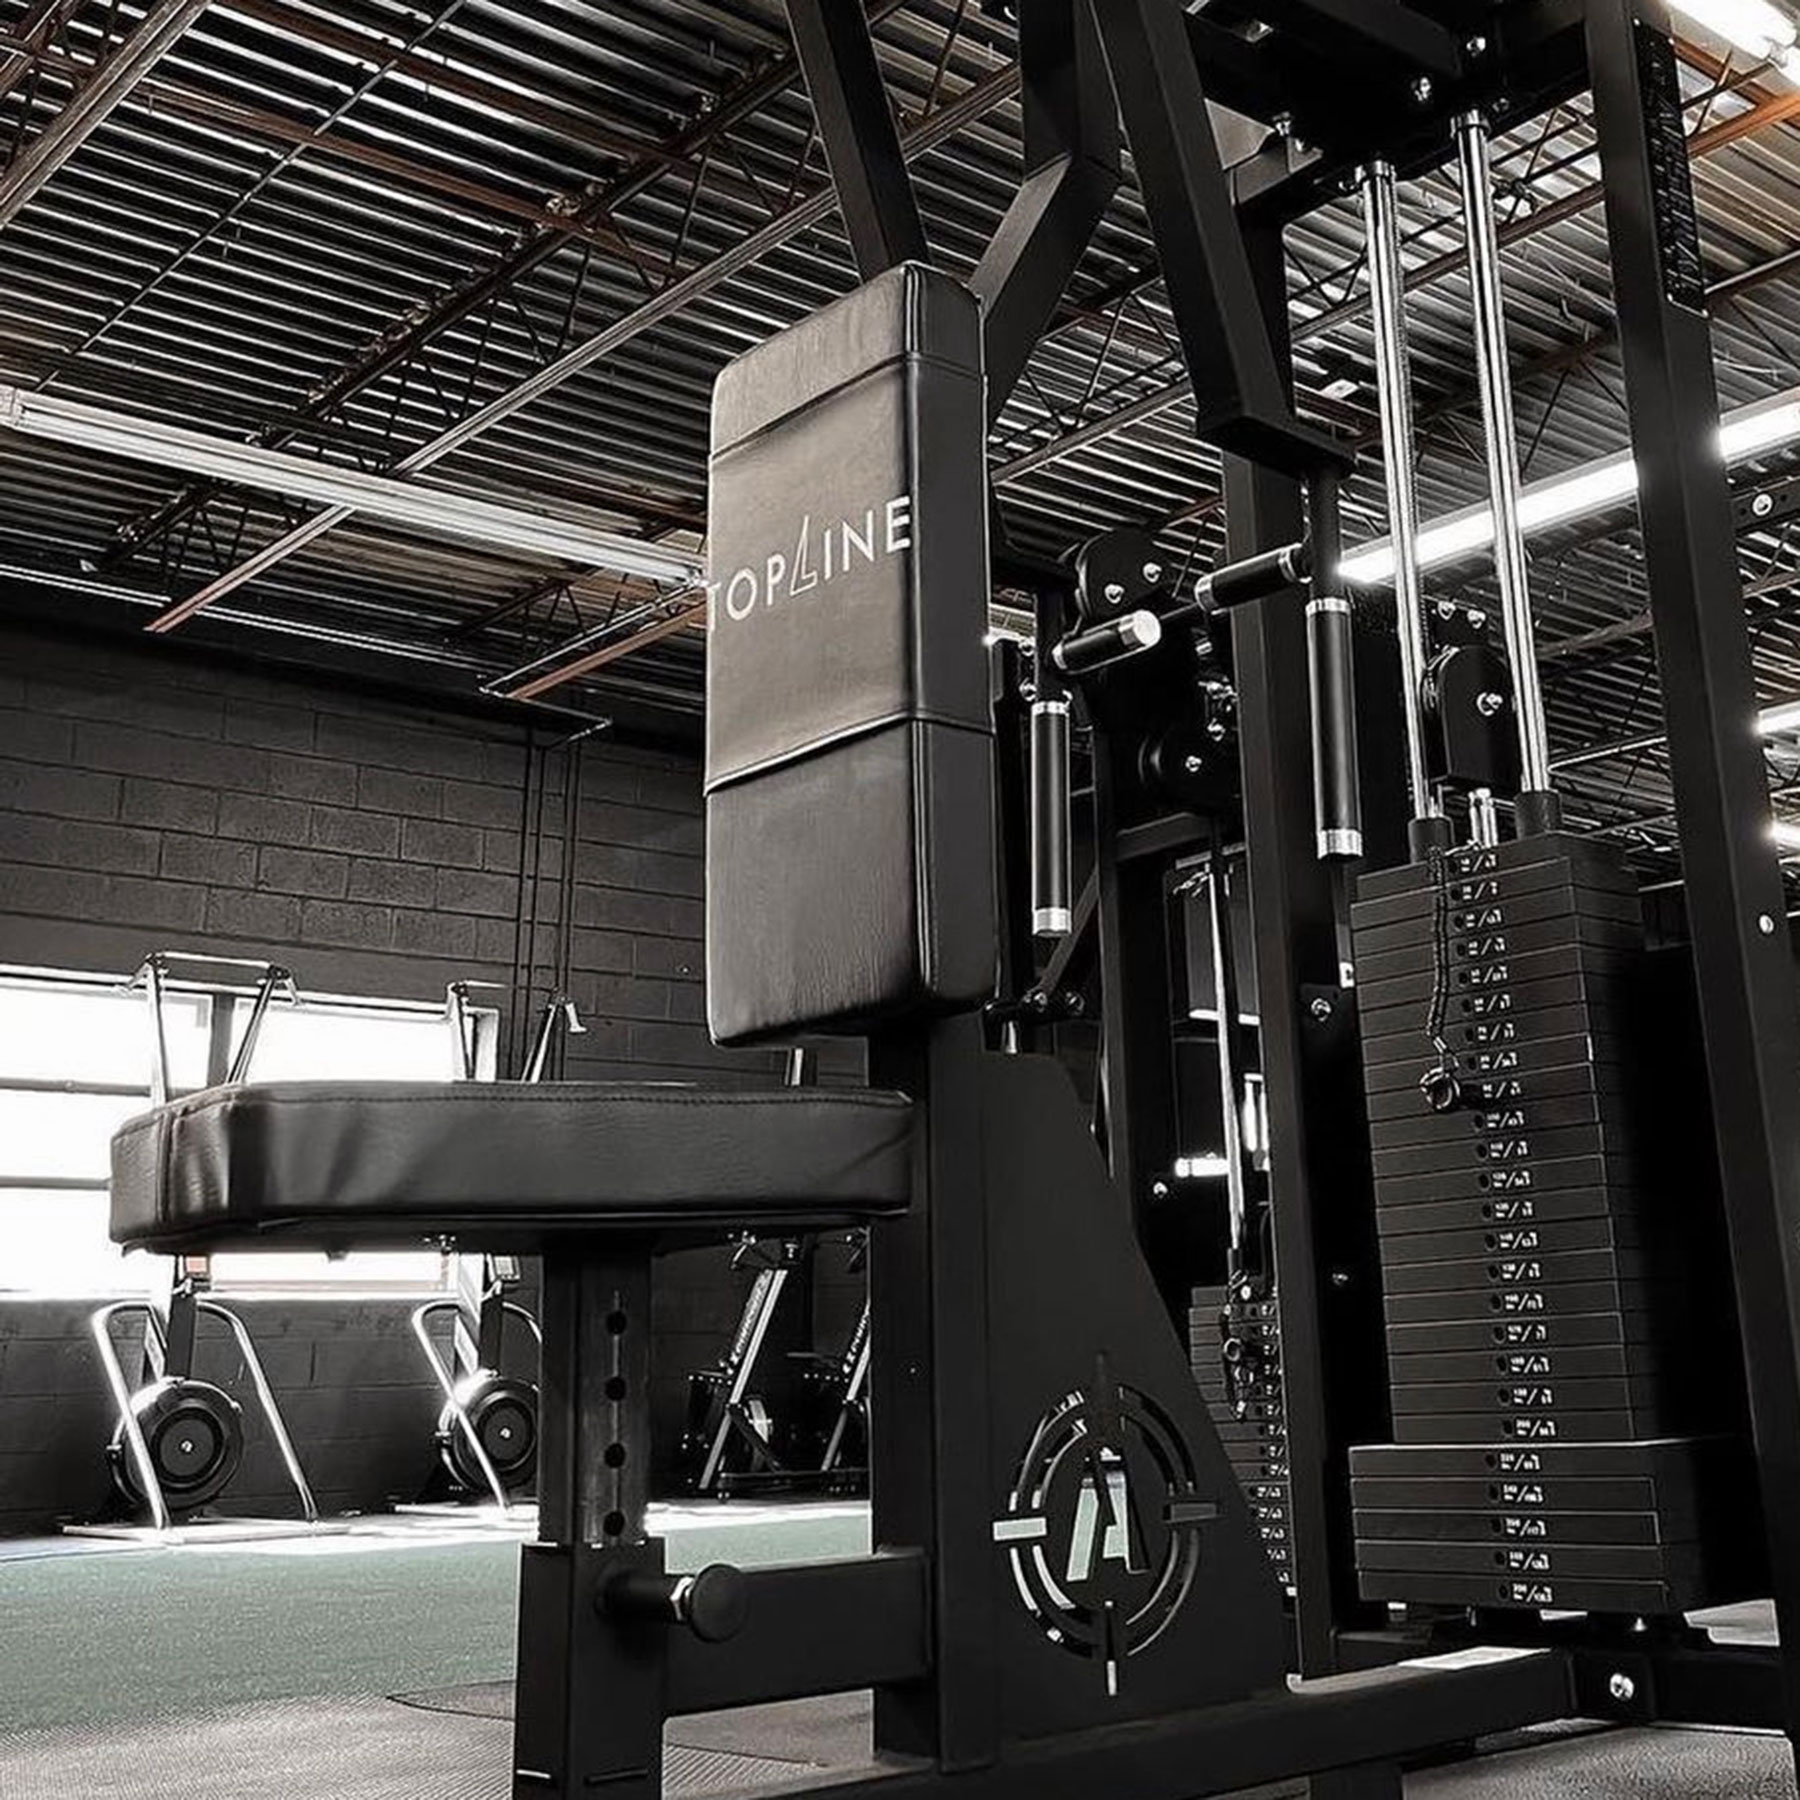 Gym Design  Five Questions to Ask Before Building Out Your Gym